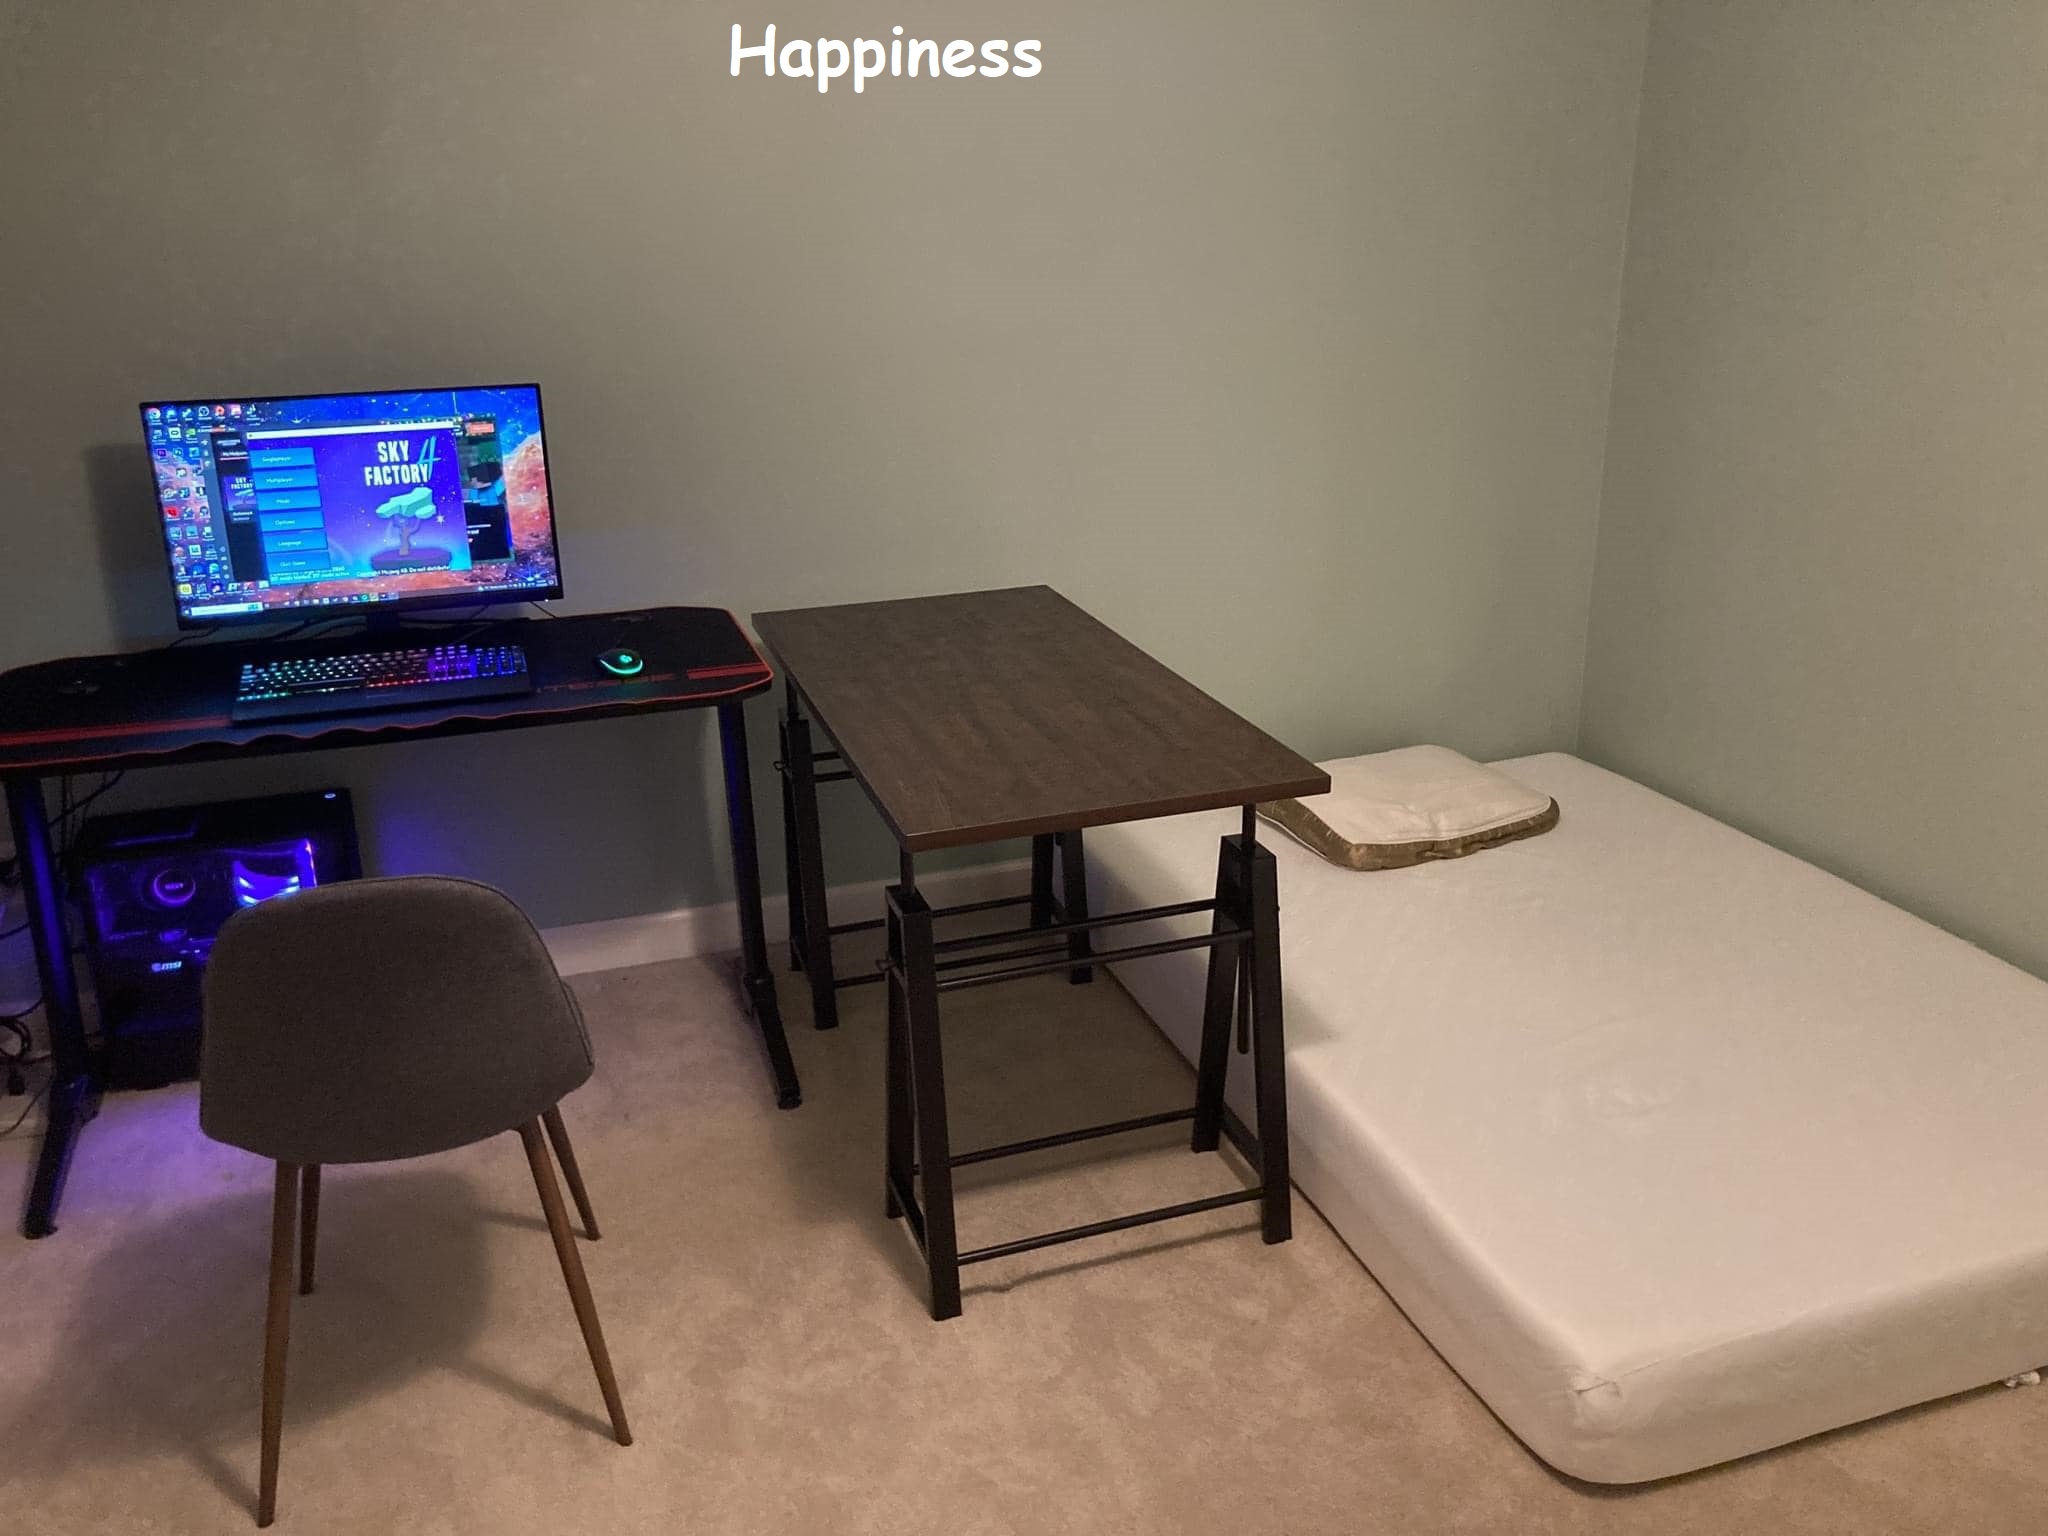 A programmer happiness living area